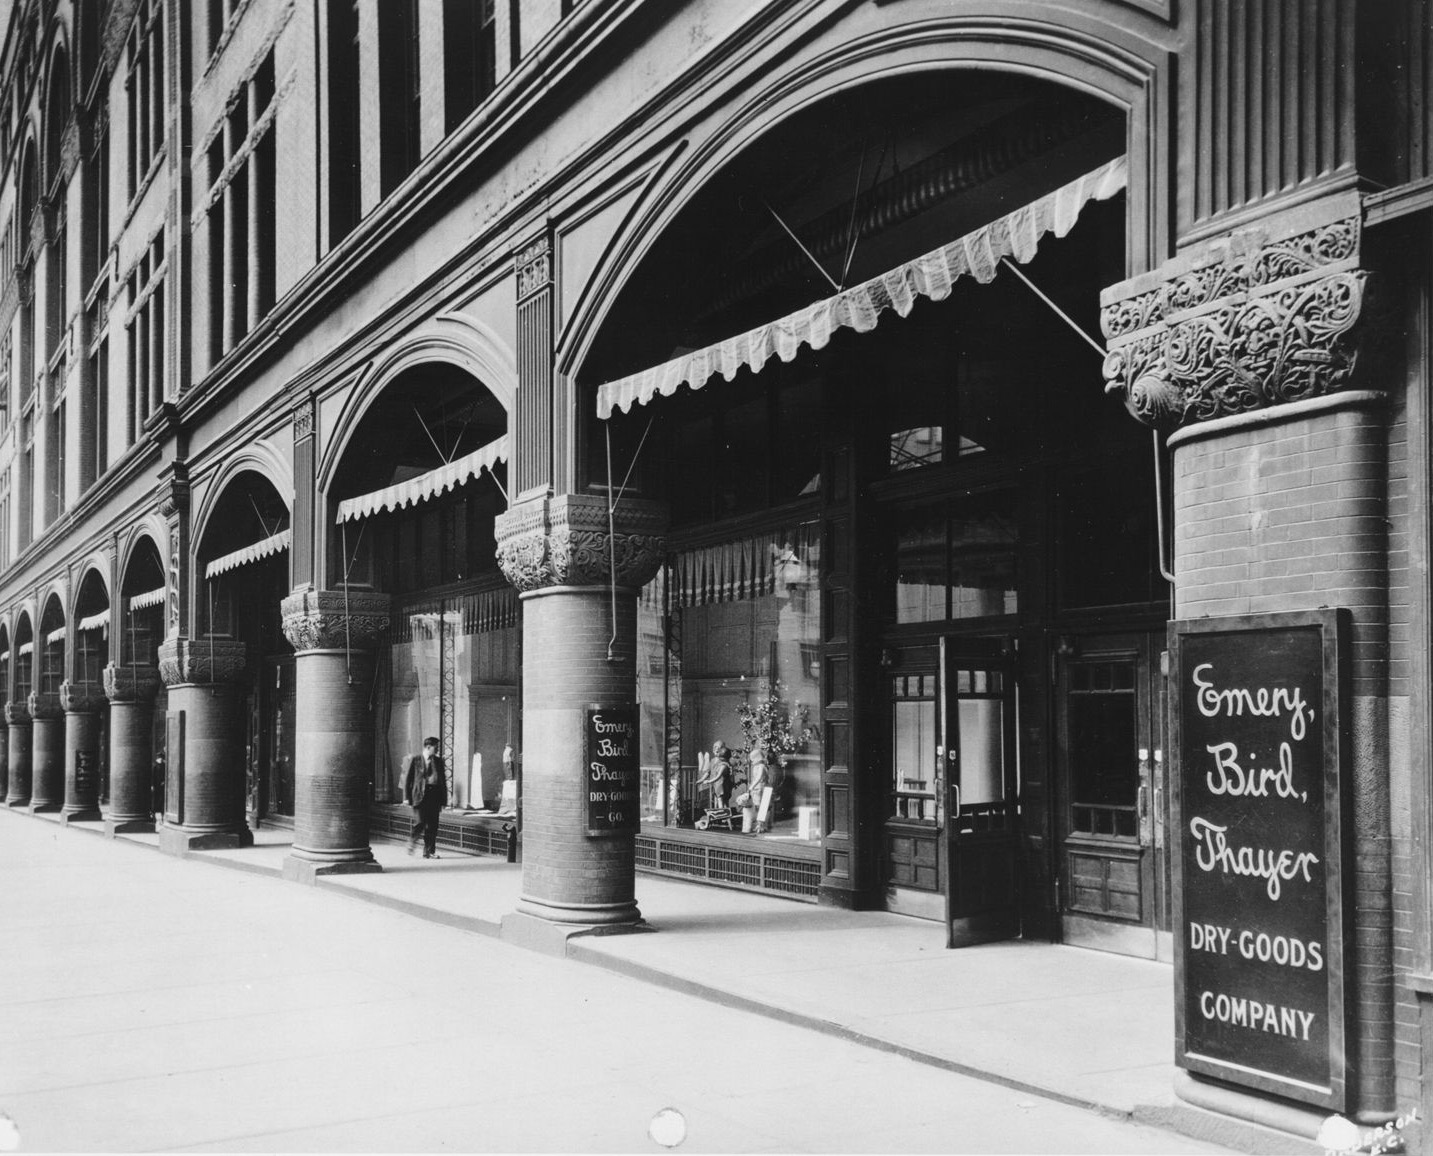 Emery, Bird, Thayer and Co. building